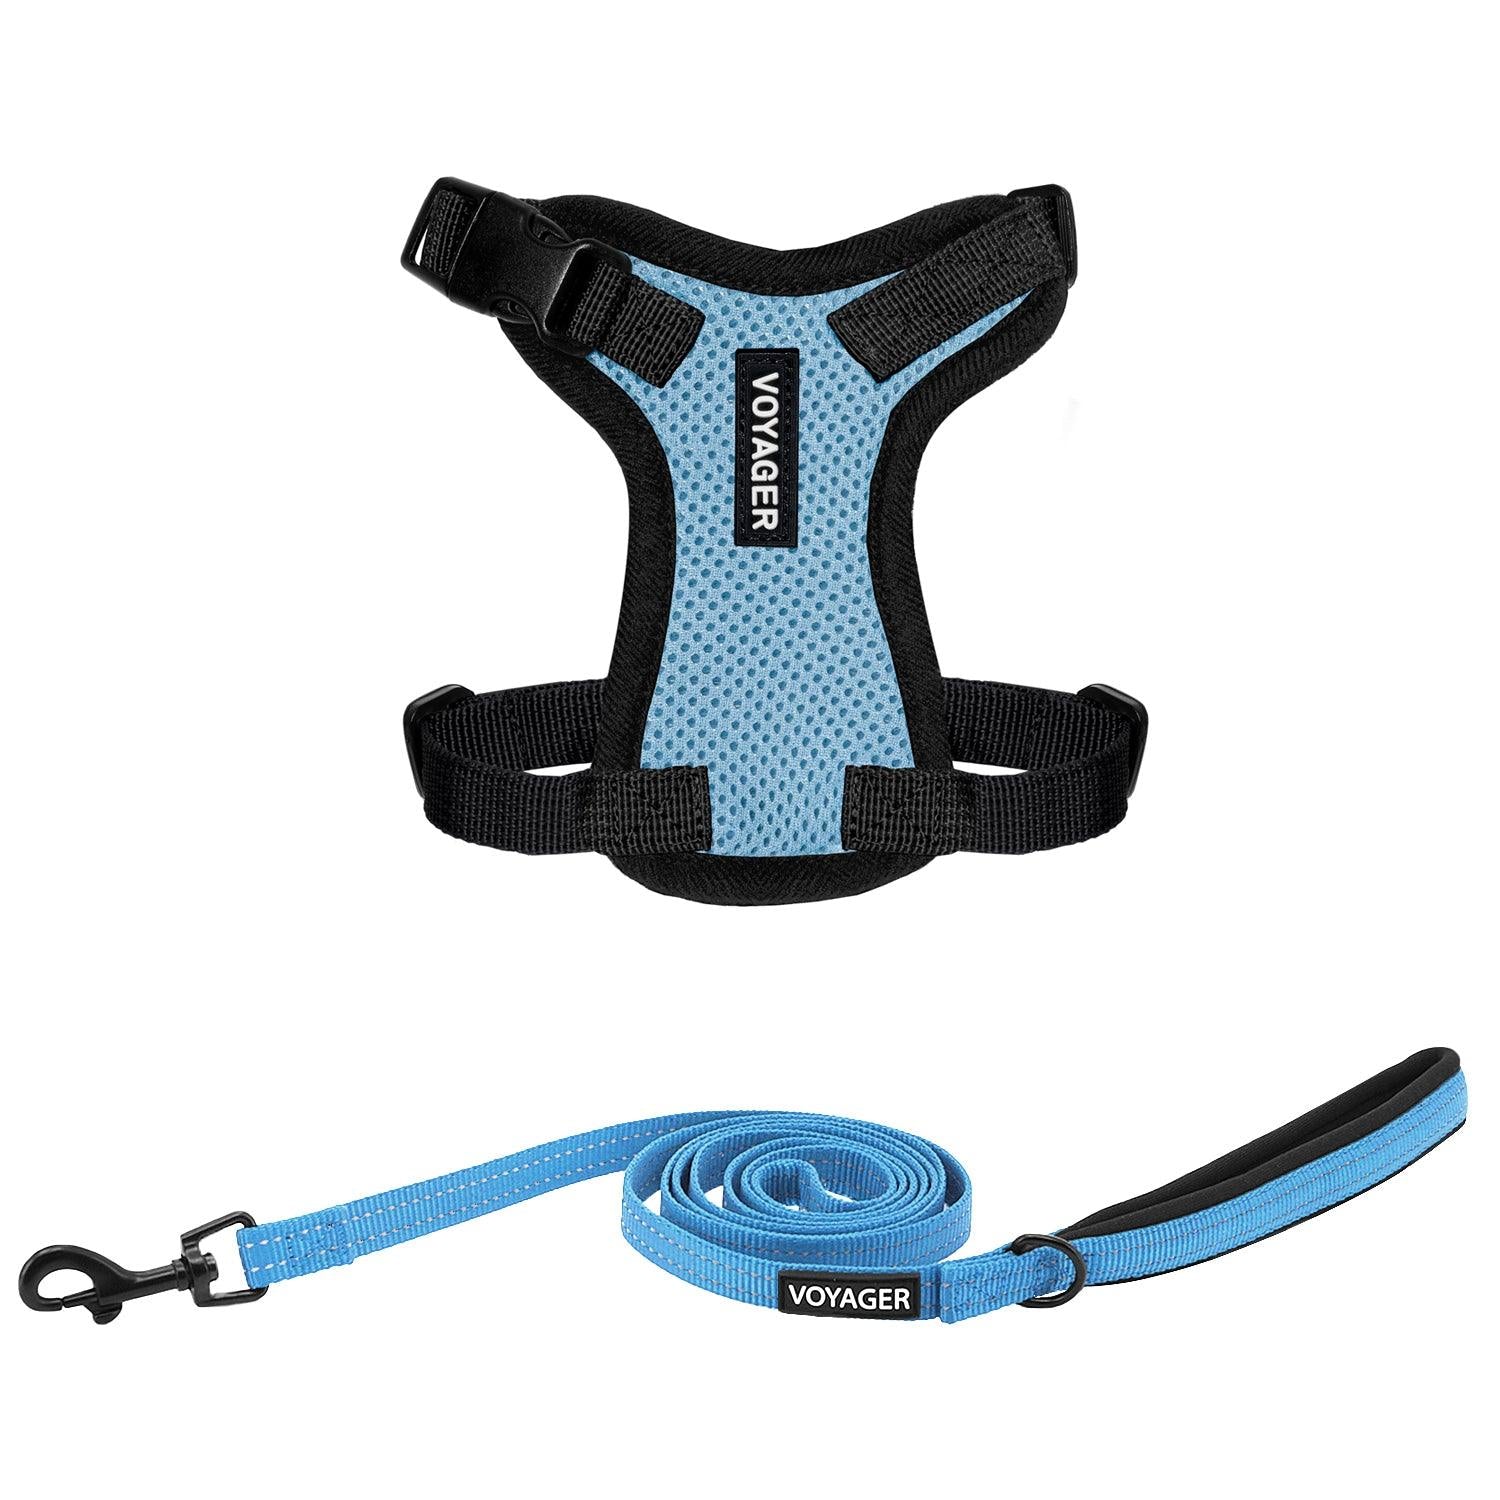 Step-In Lock Harness & Leash Set For Cats - VOYAGER Dog Harnesses